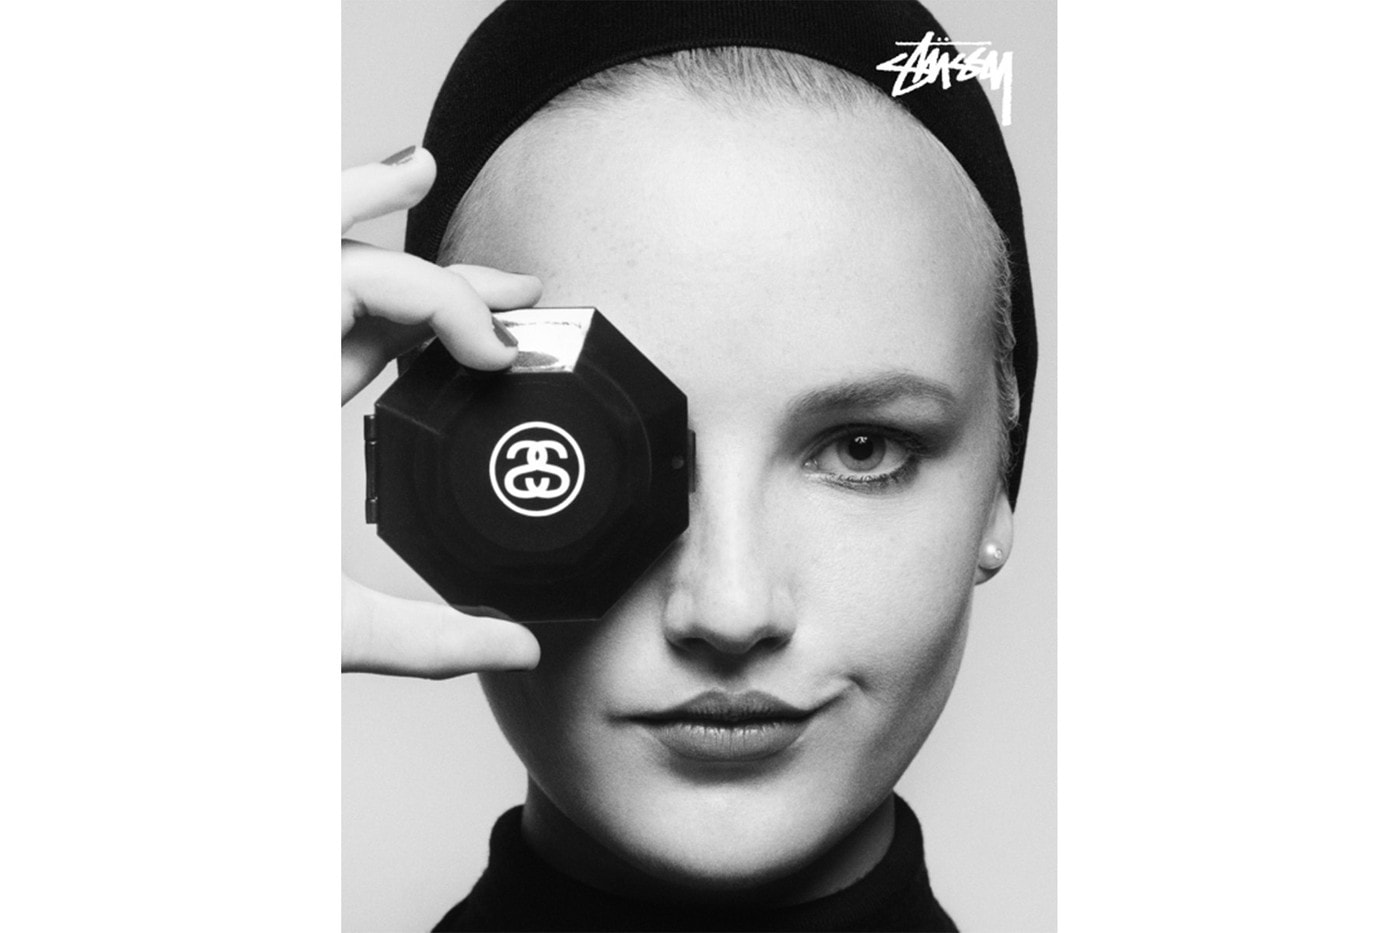 Stussy's Spring 2019 Campaign Inspired by Chanel